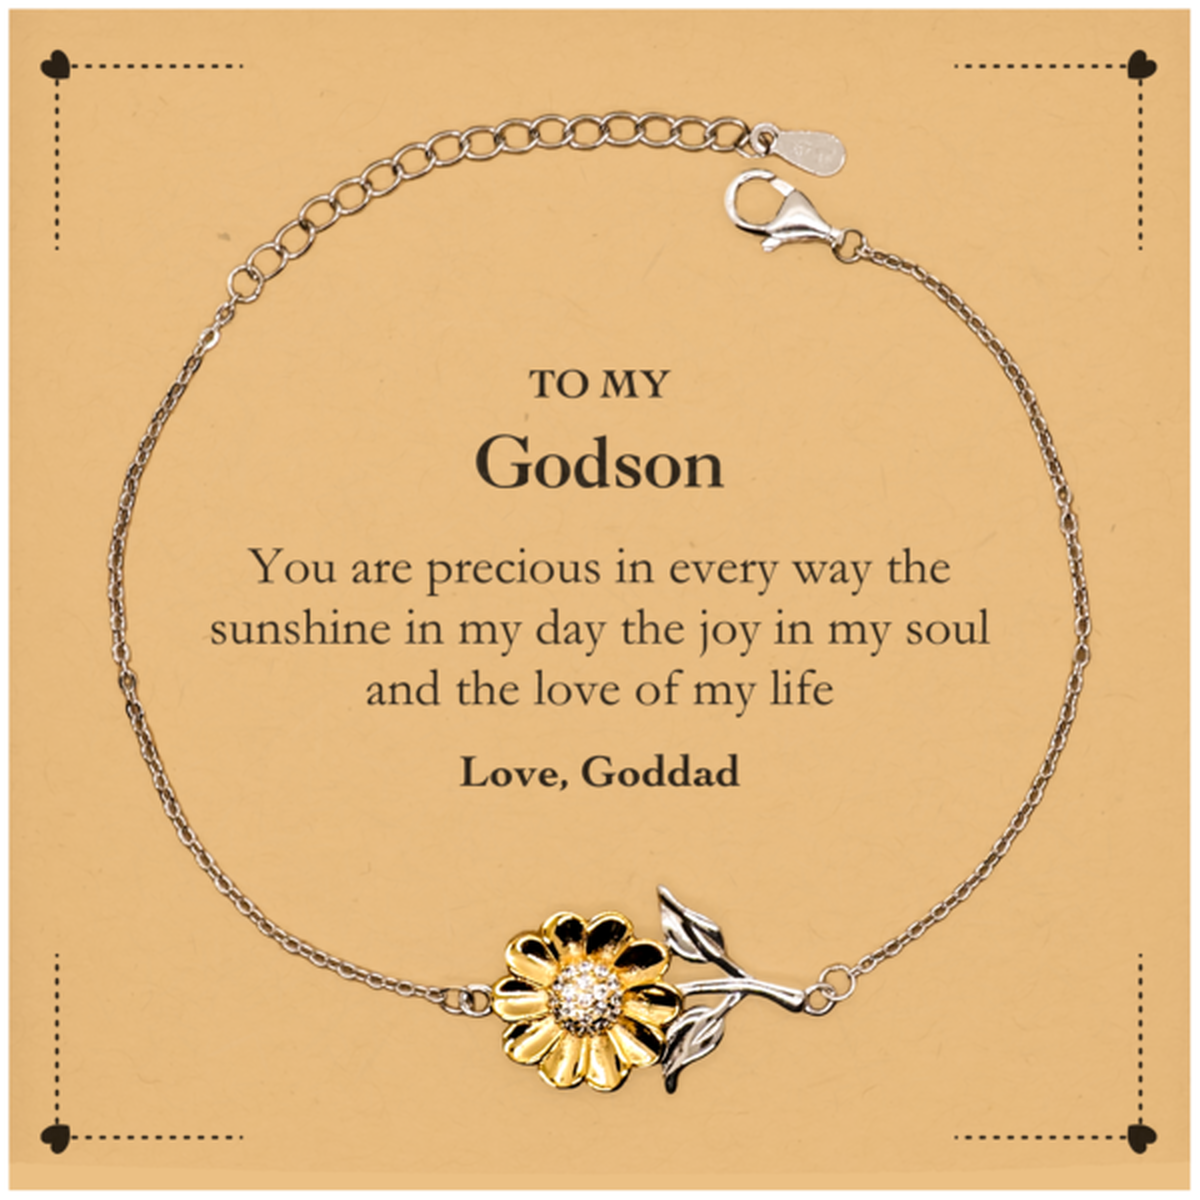 Graduation Gifts for Godson Sunflower Bracelet Present from Goddad, Christmas Godson Birthday Gifts Godson You are precious in every way the sunshine in my day. Love, Goddad